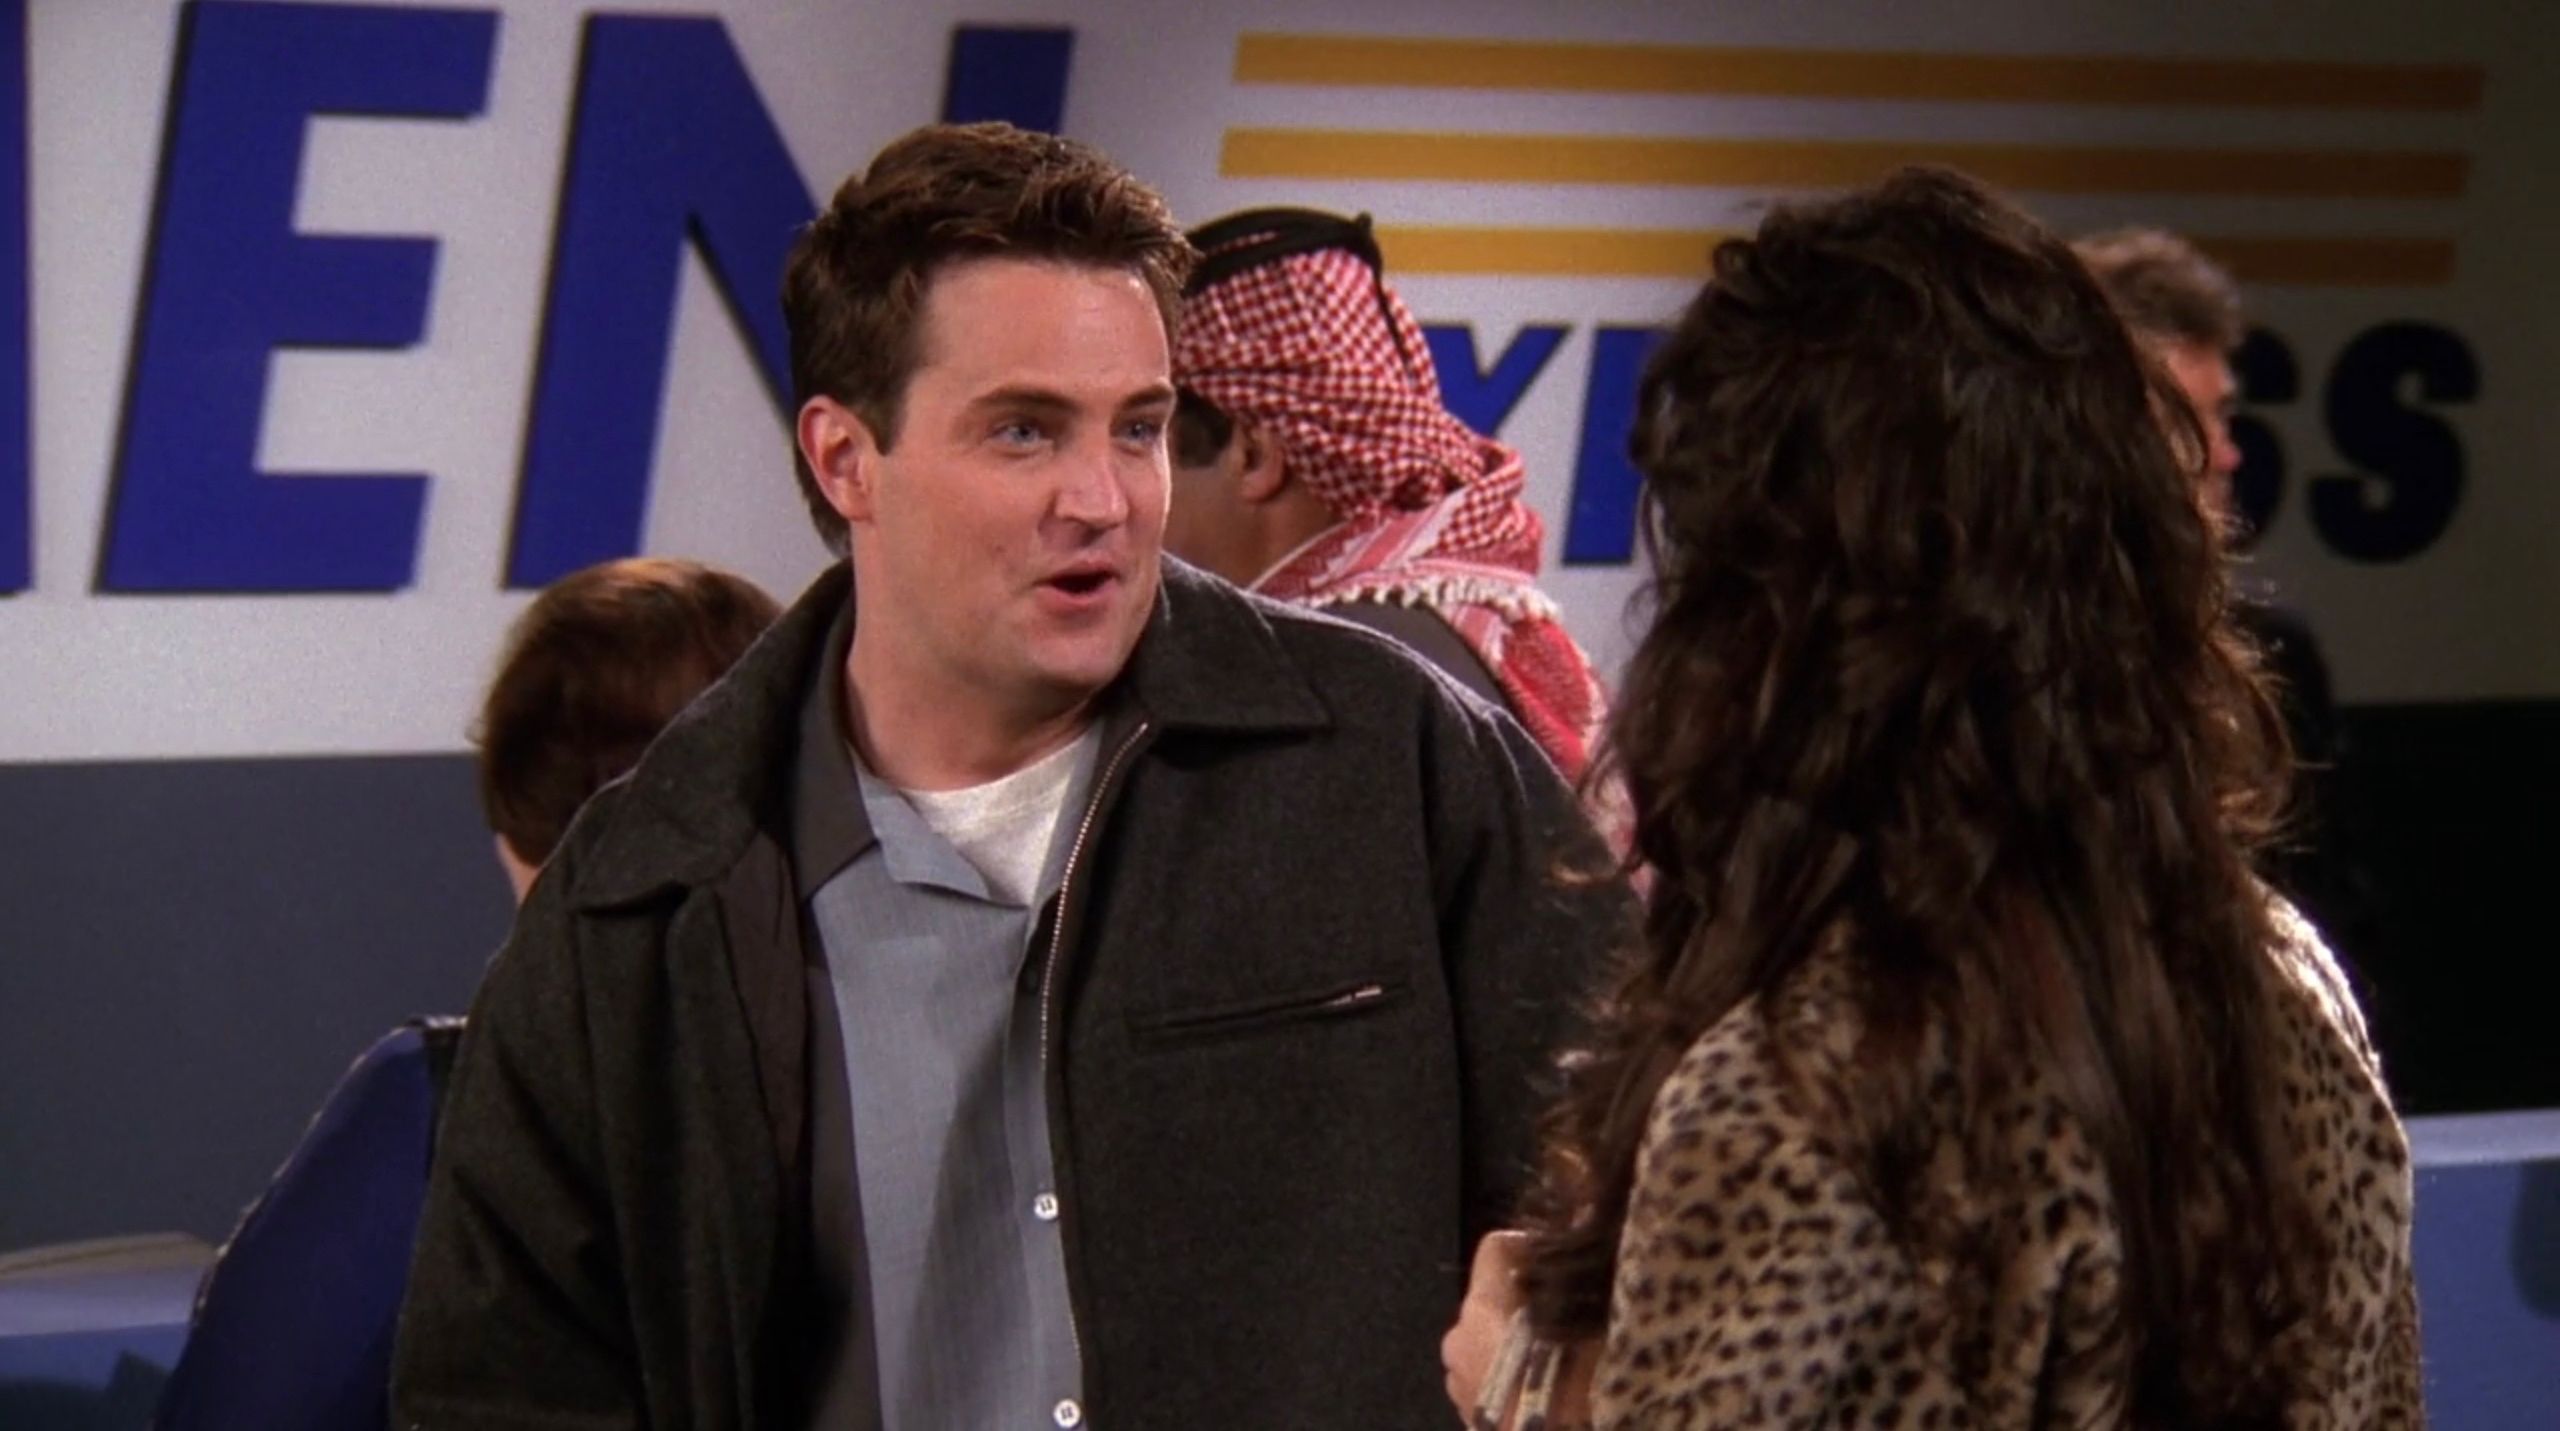 Friends Chandler pretended to move to Yemen to get rid of Janice